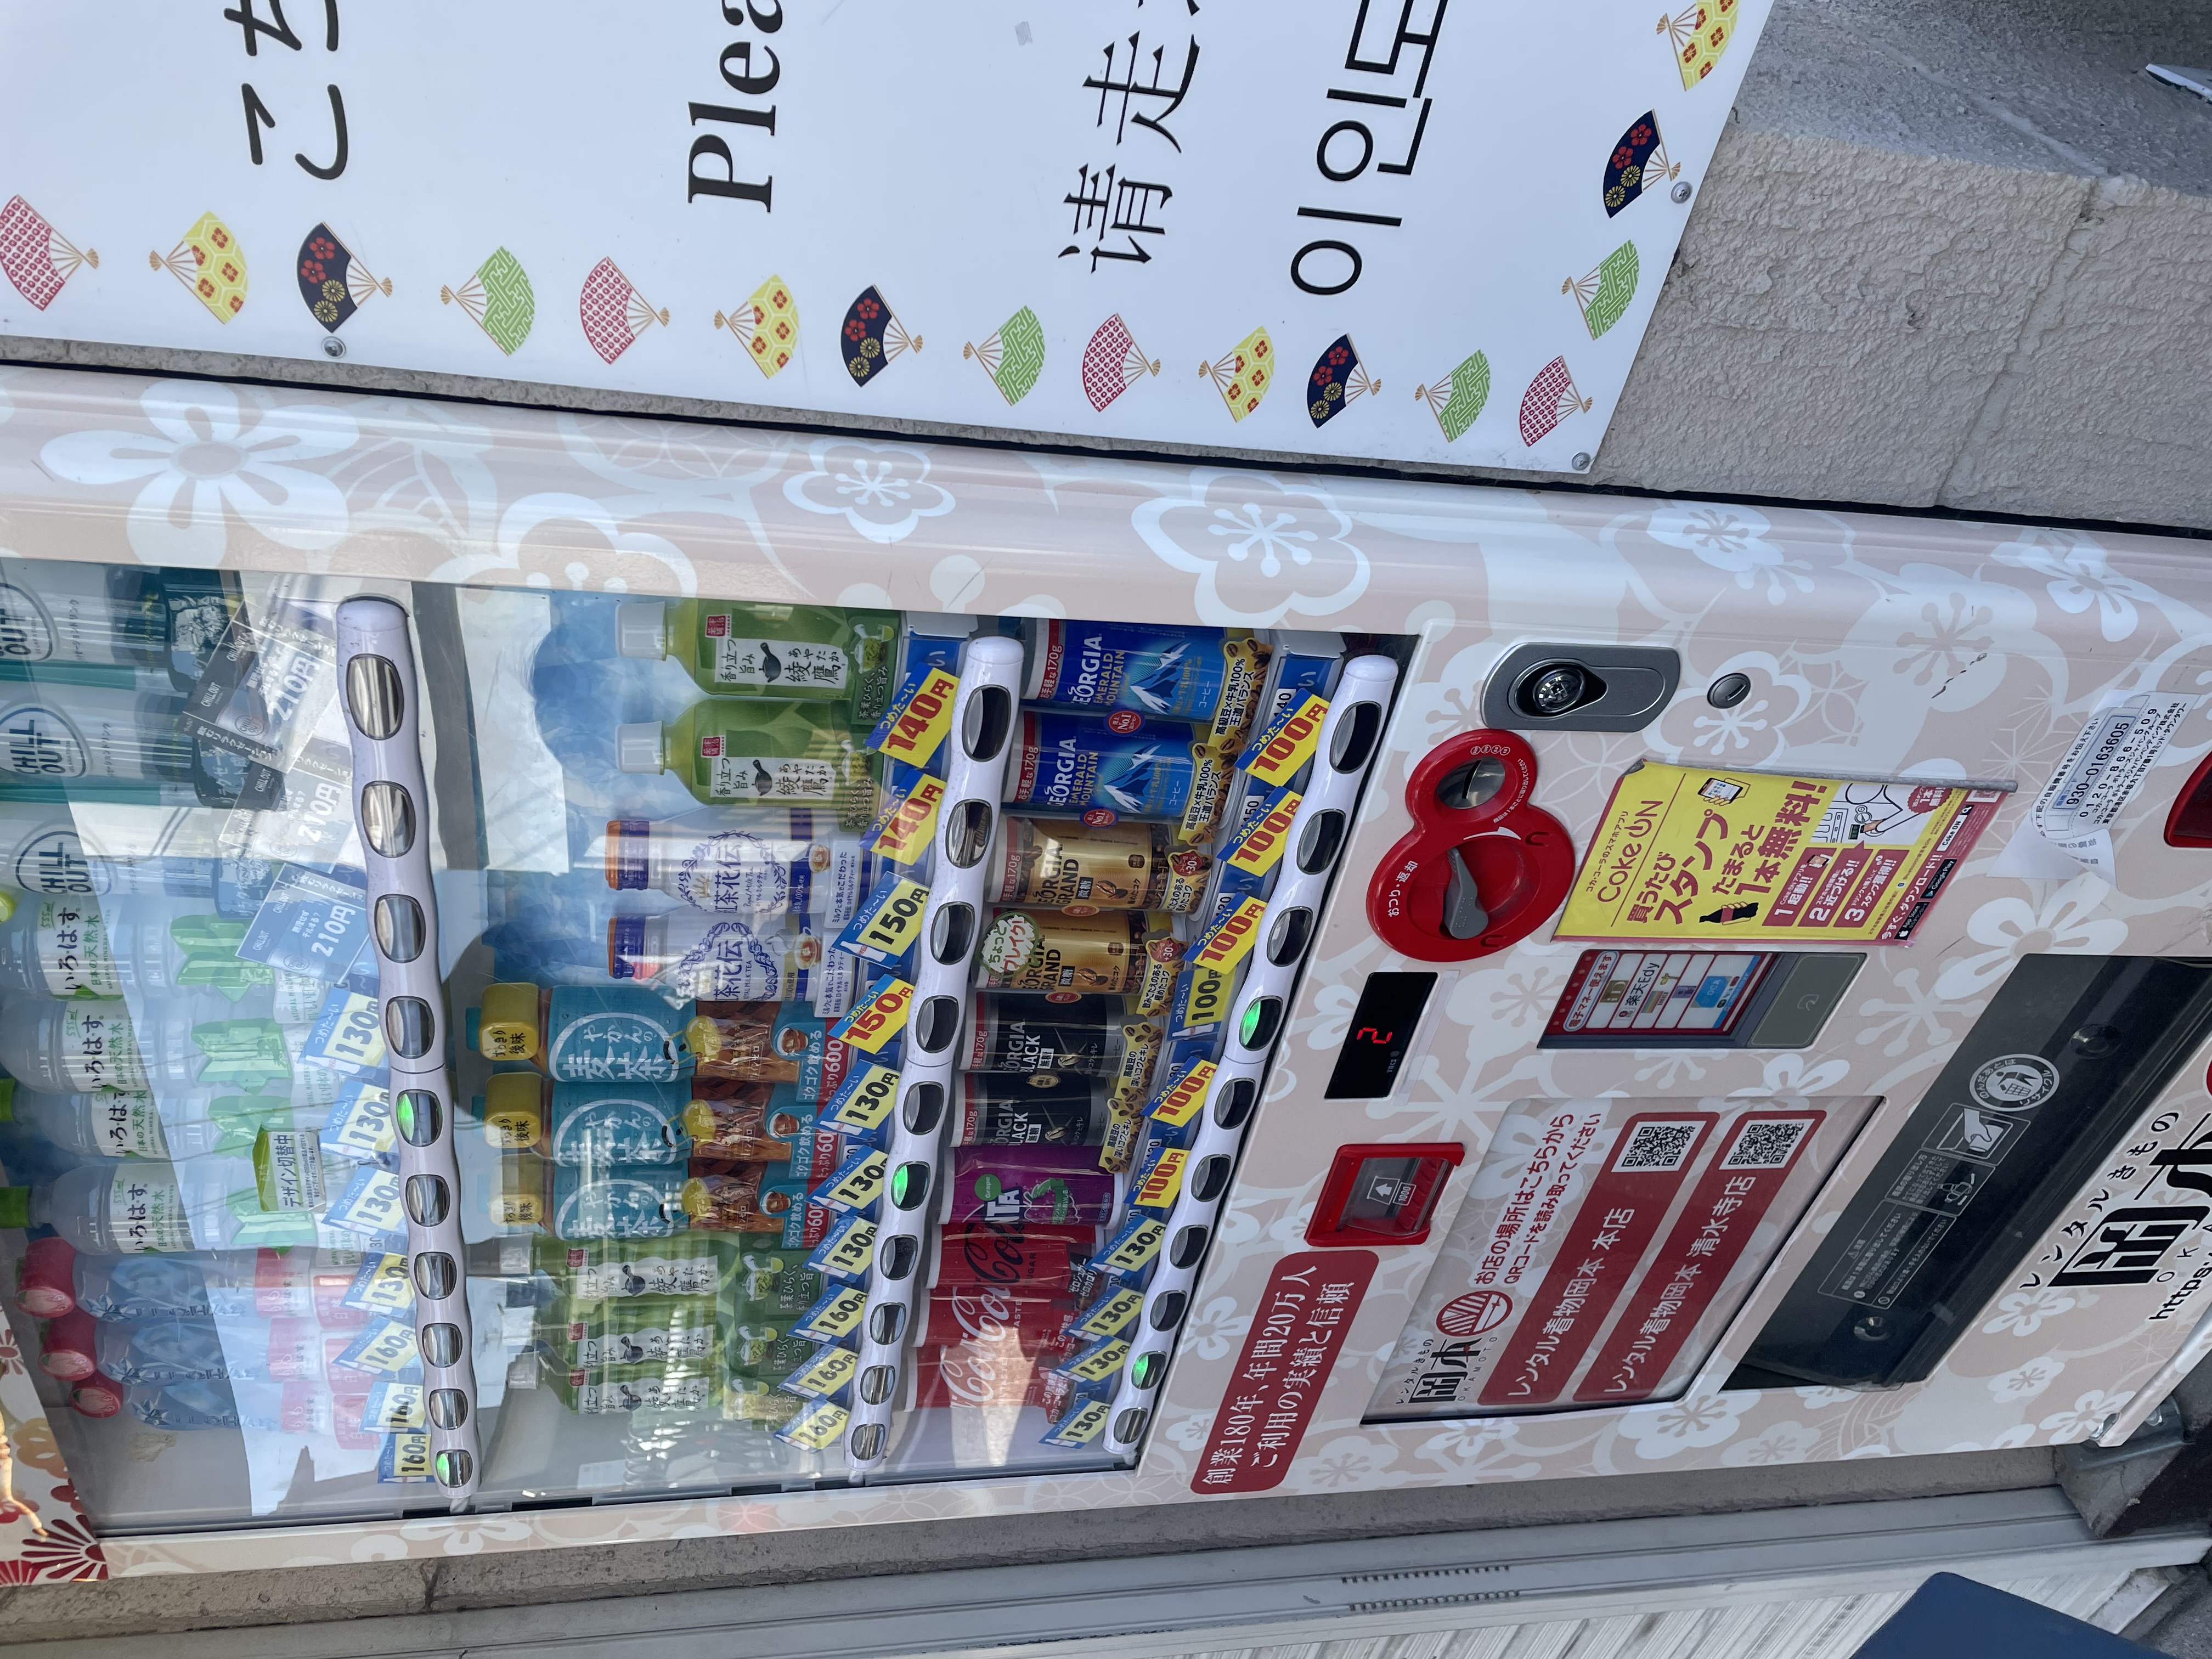 Vending machine with drinks